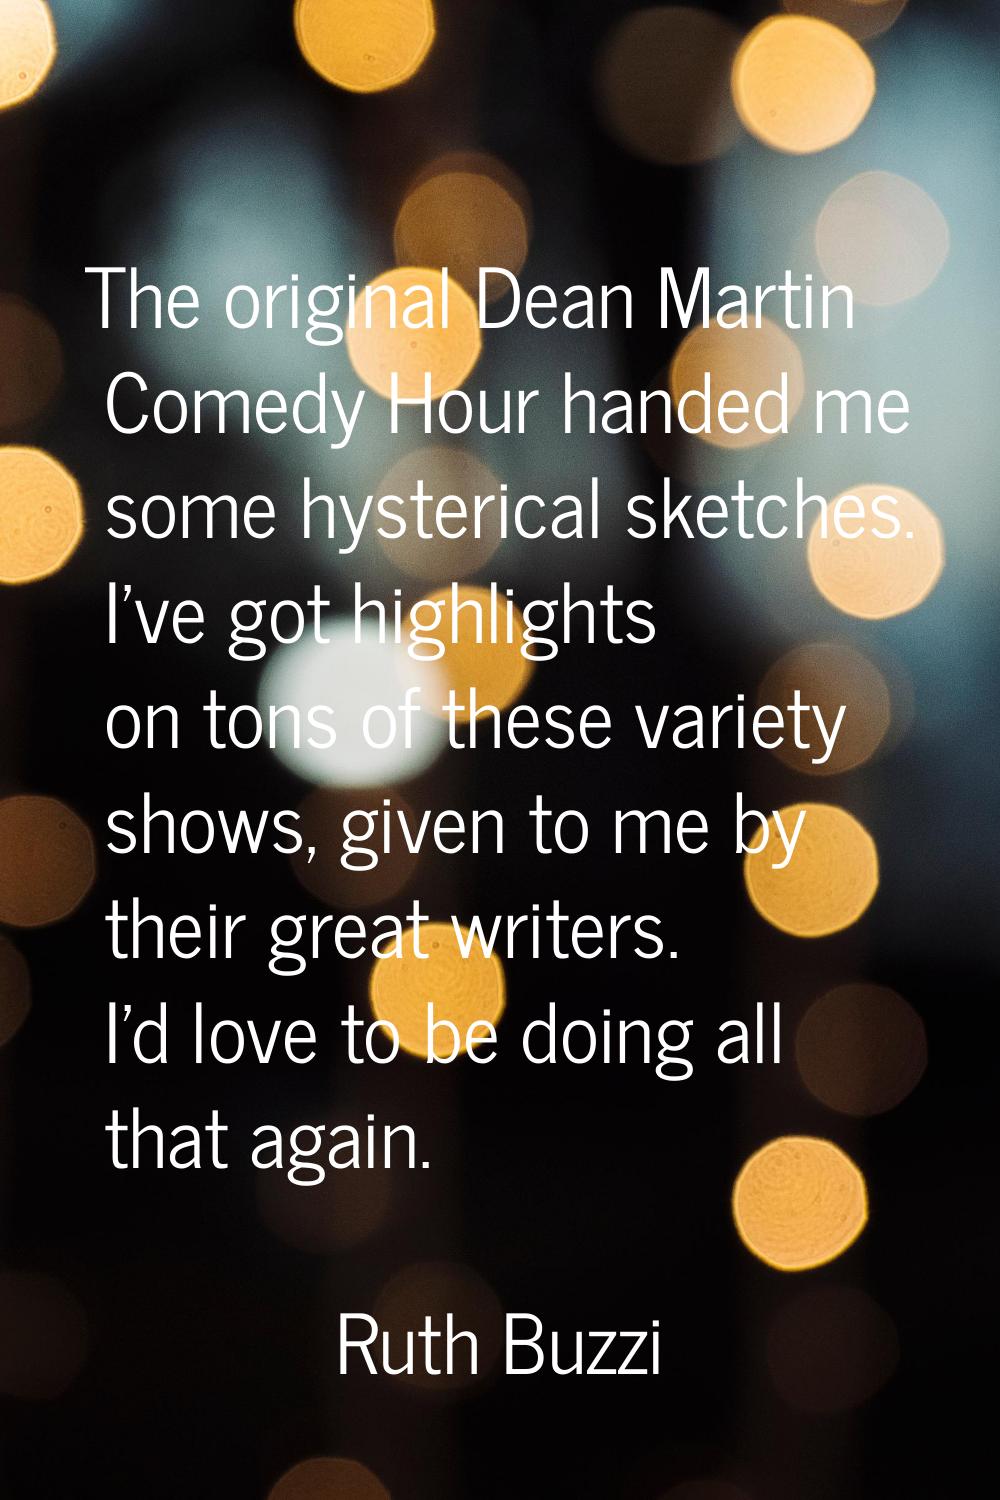 The original Dean Martin Comedy Hour handed me some hysterical sketches. I've got highlights on ton